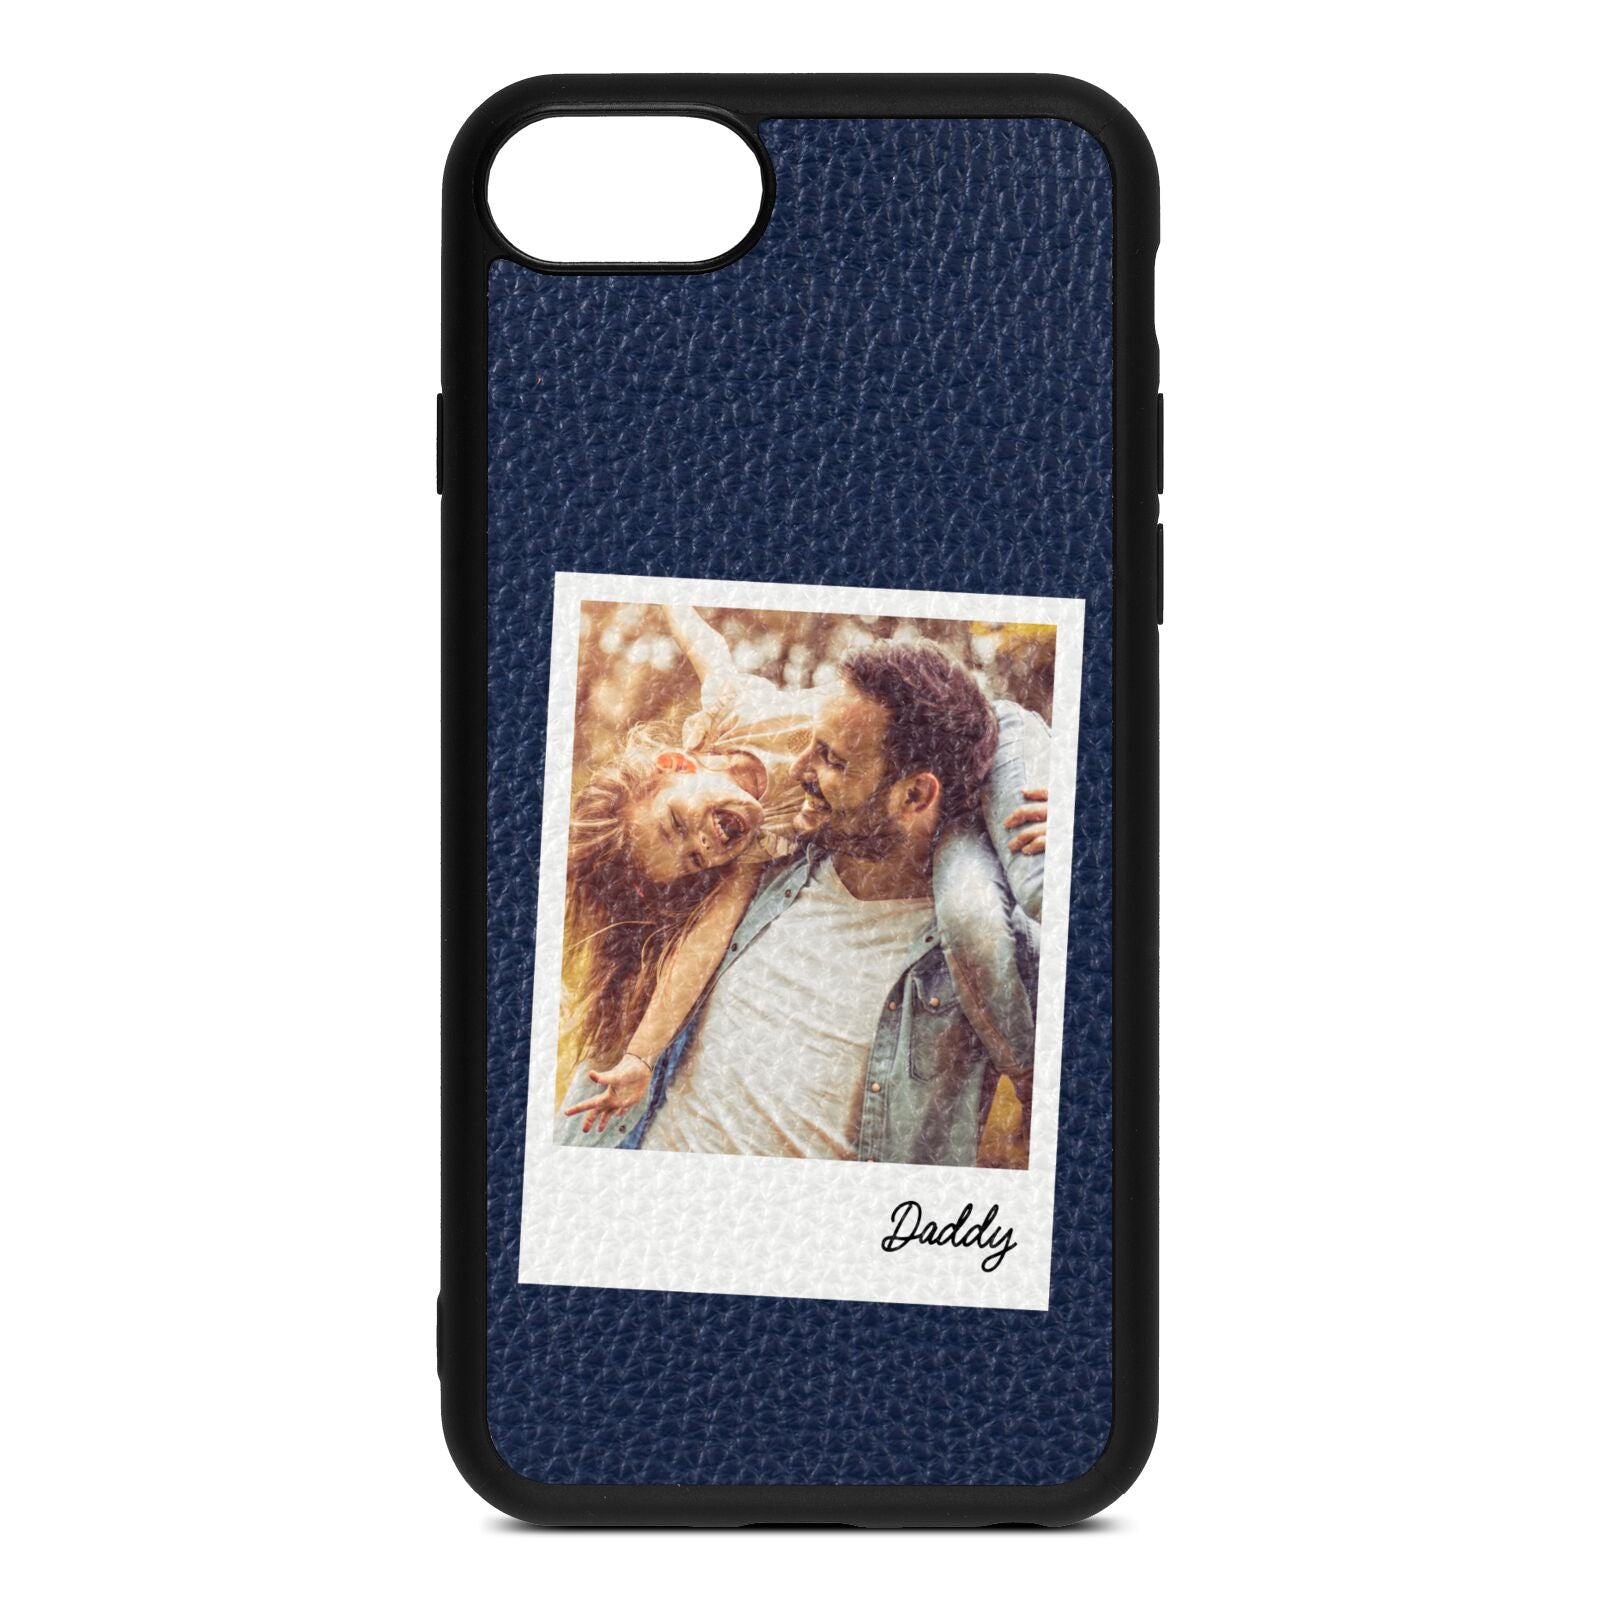 Fathers Day Photo Navy Blue Pebble Leather iPhone 8 Case